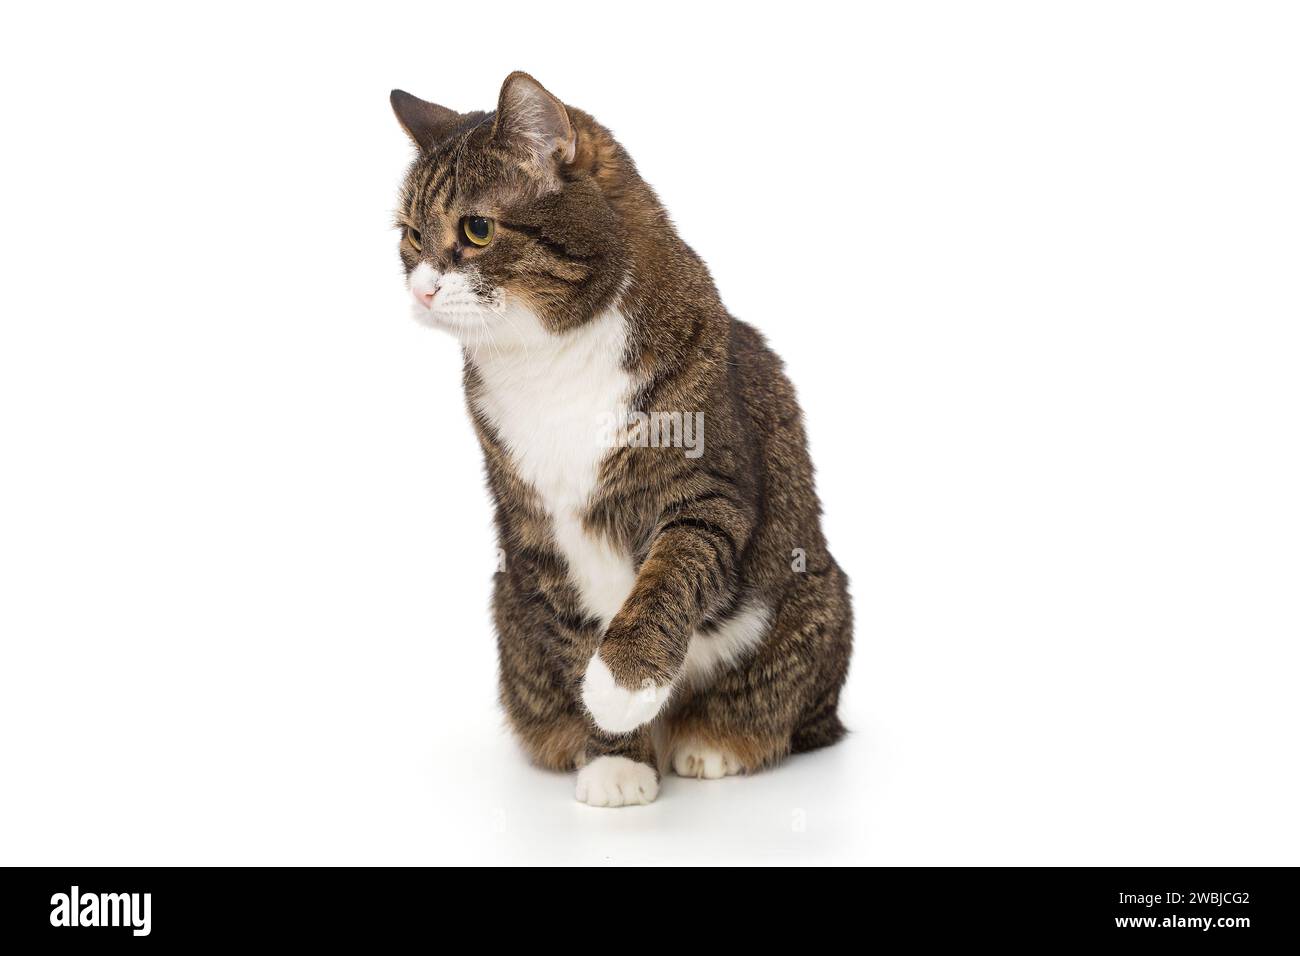 Grey, striped cat stares away and plays with its paw, isolated on a white background Stock Photo